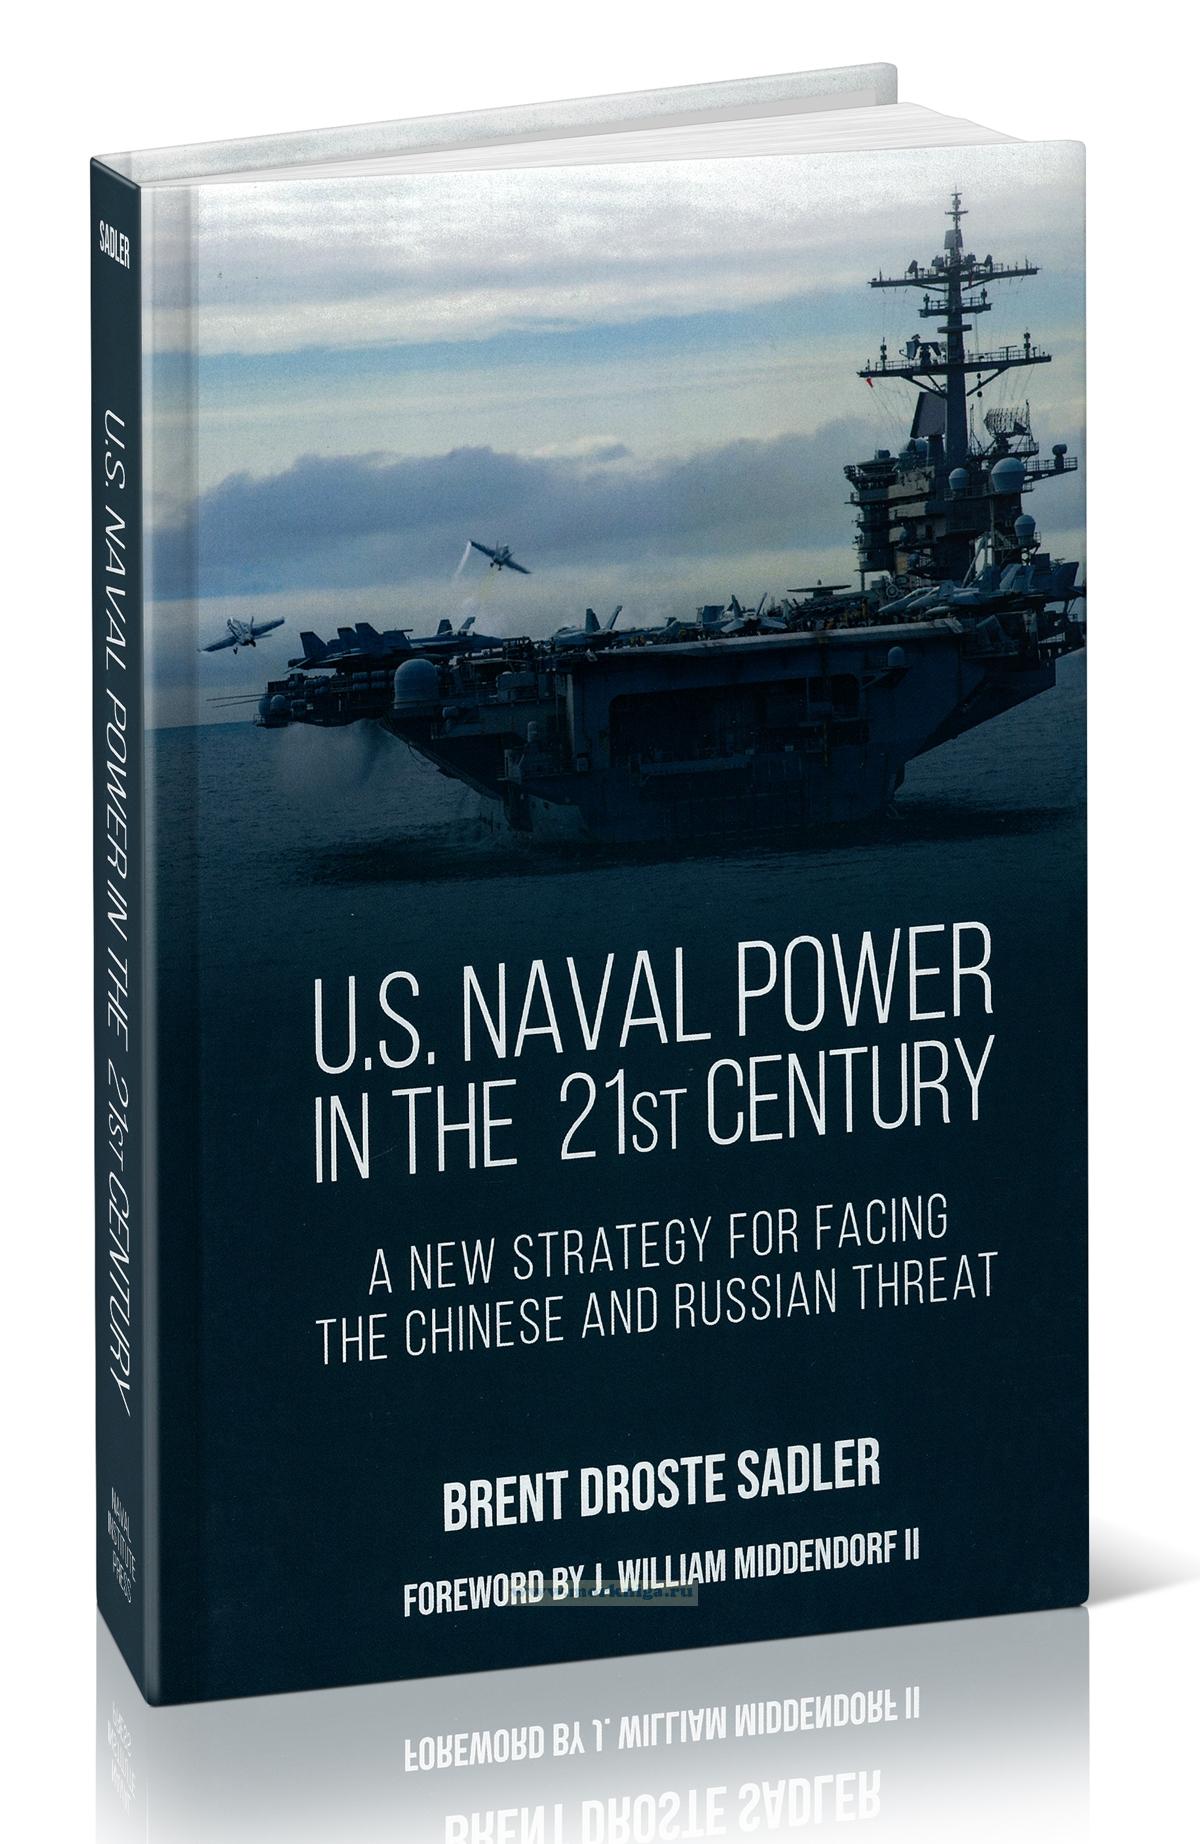 U.S. Naval Power in the 21st Century. A New Strategy for Facing the Chinese and Russian Threat